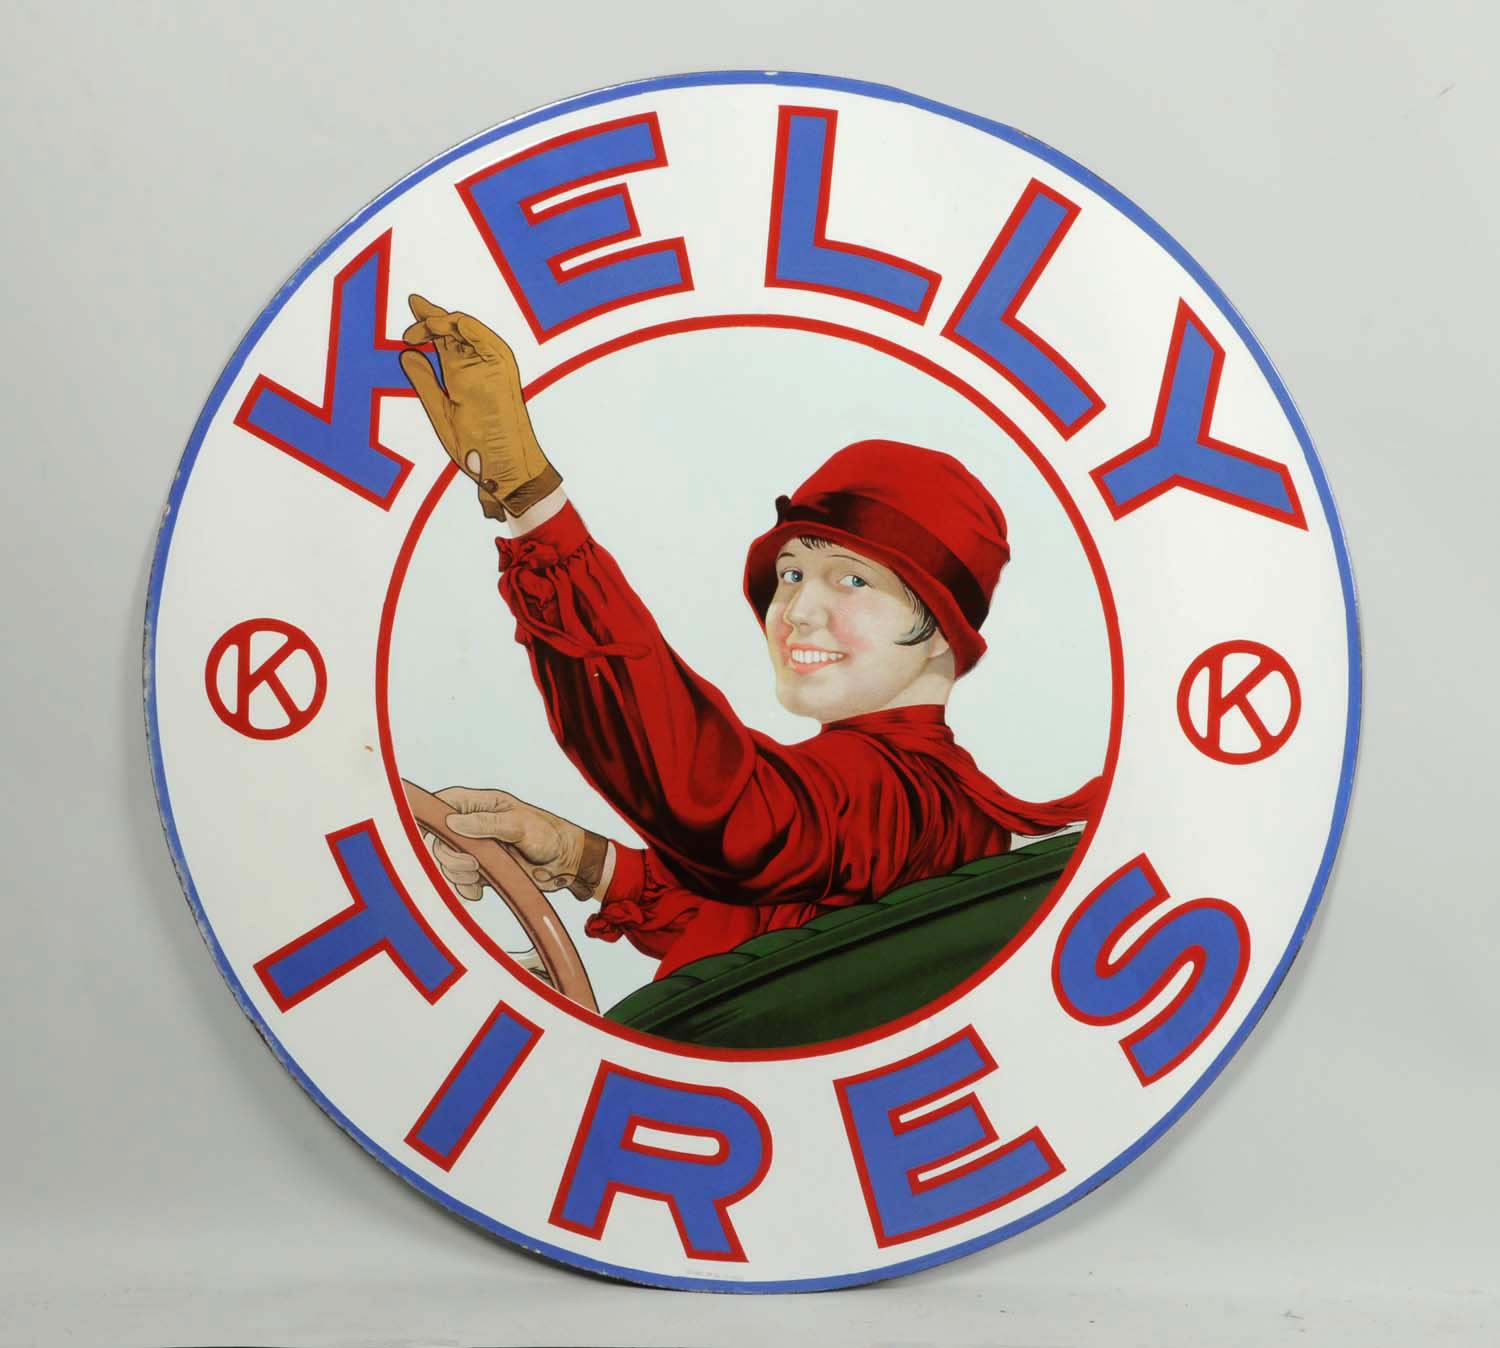 Kelly Tires w/ Lotta Miles Graphic Porcelain Sign, Estimated at $50,000-80,000.